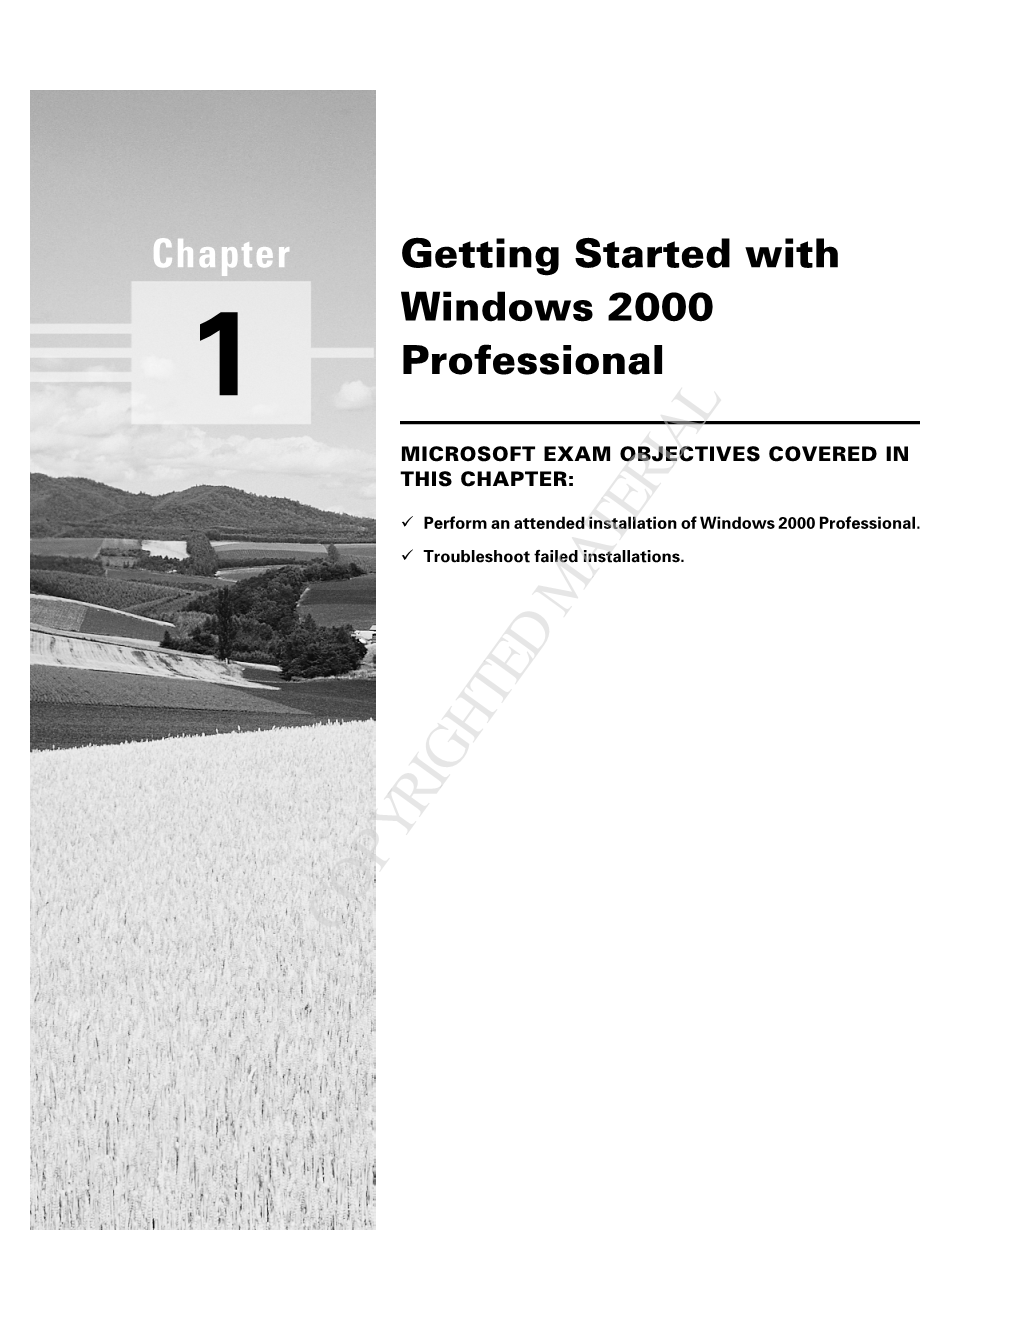 Chapter 1 Getting Started with Windows 2000 Professional